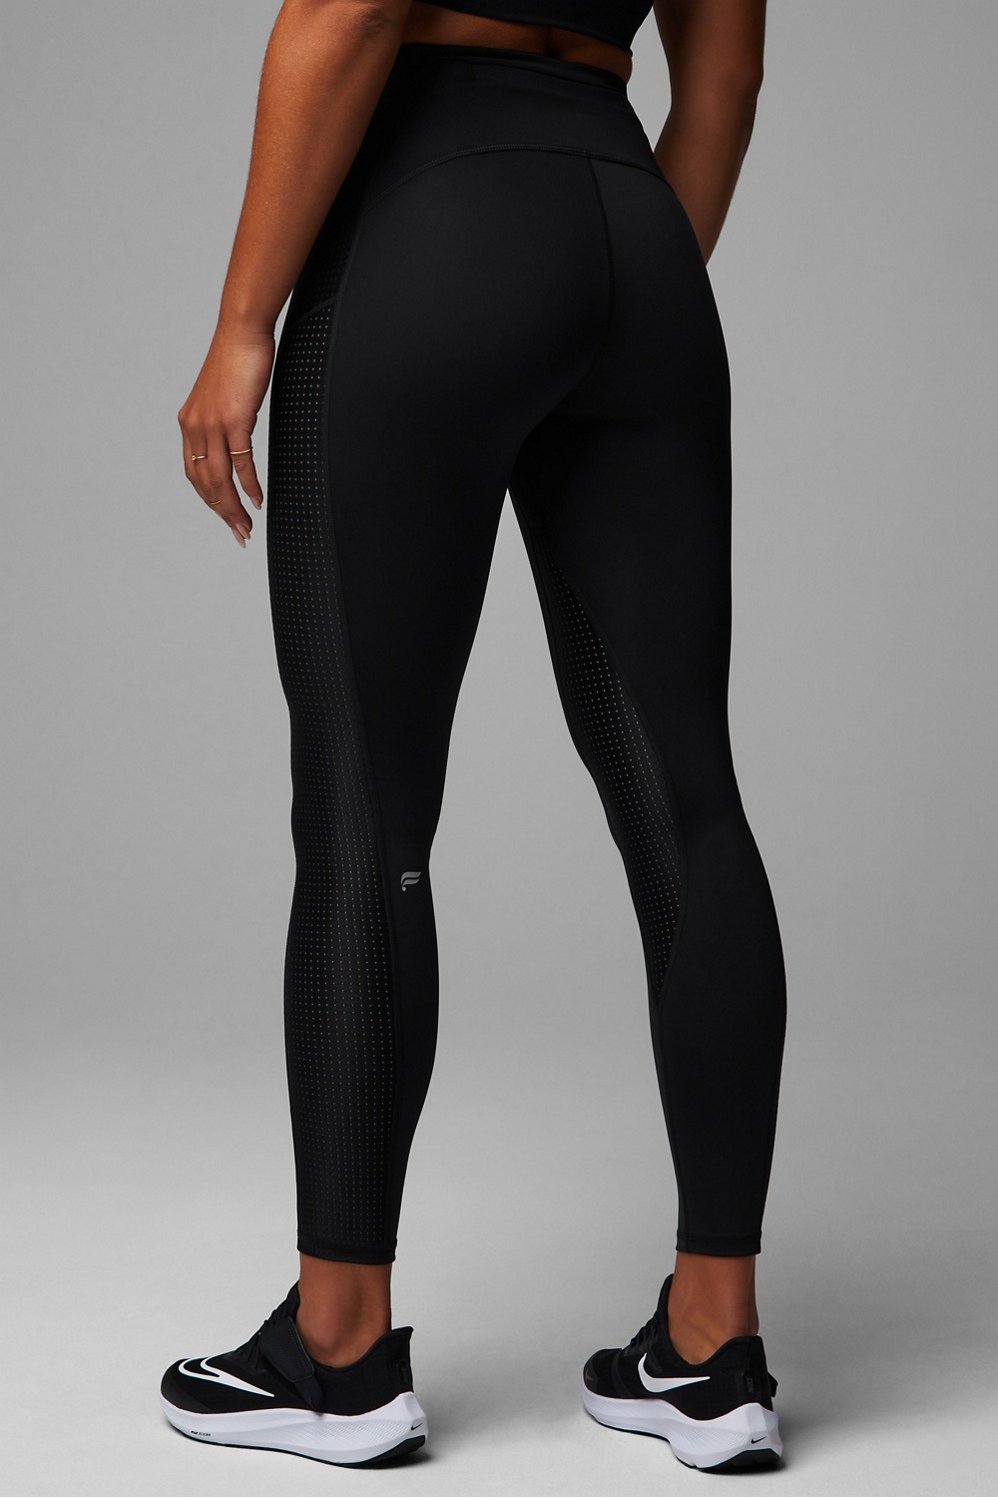 Fabletics Small Motion365+ High-Waisted Legging - Black